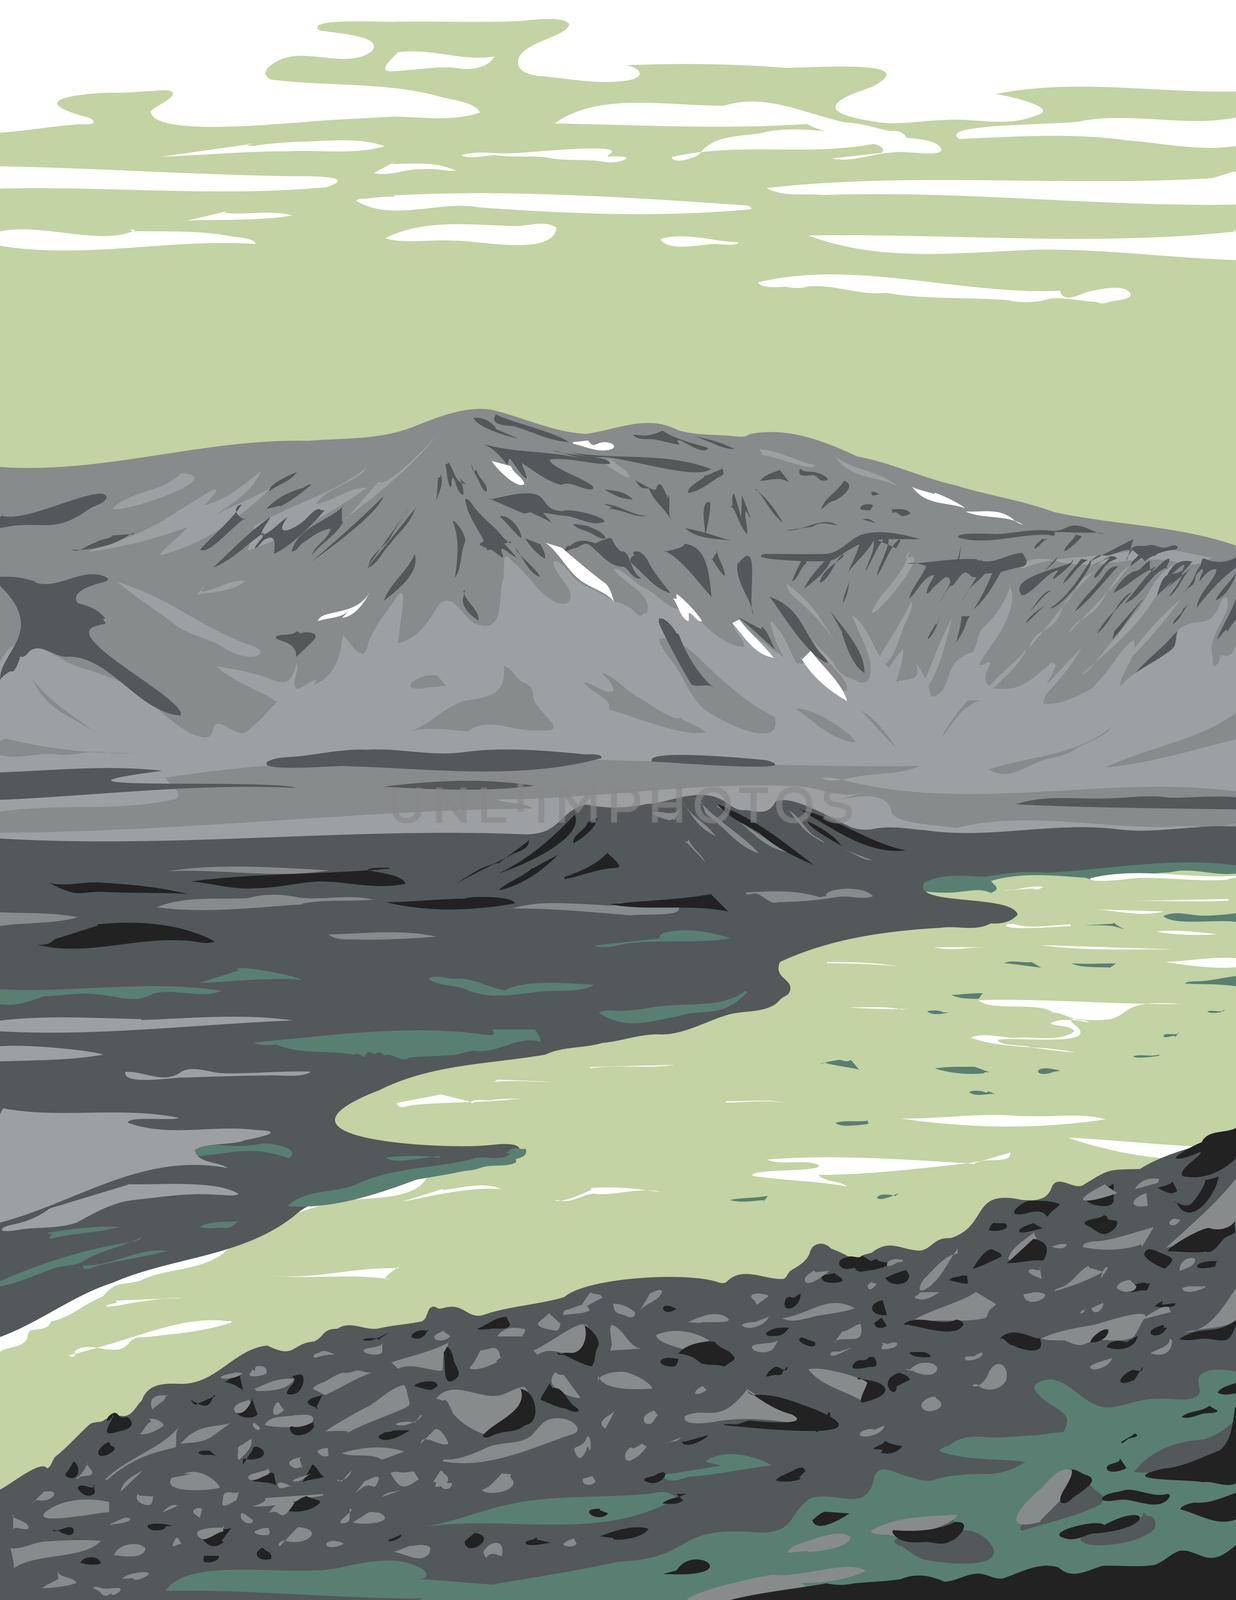 WPA poster art of a caldera in remote wilderness of the Alaska Peninsula in Aniakchak National Monument and Preserve USA done in works project administration style or federal art project style.